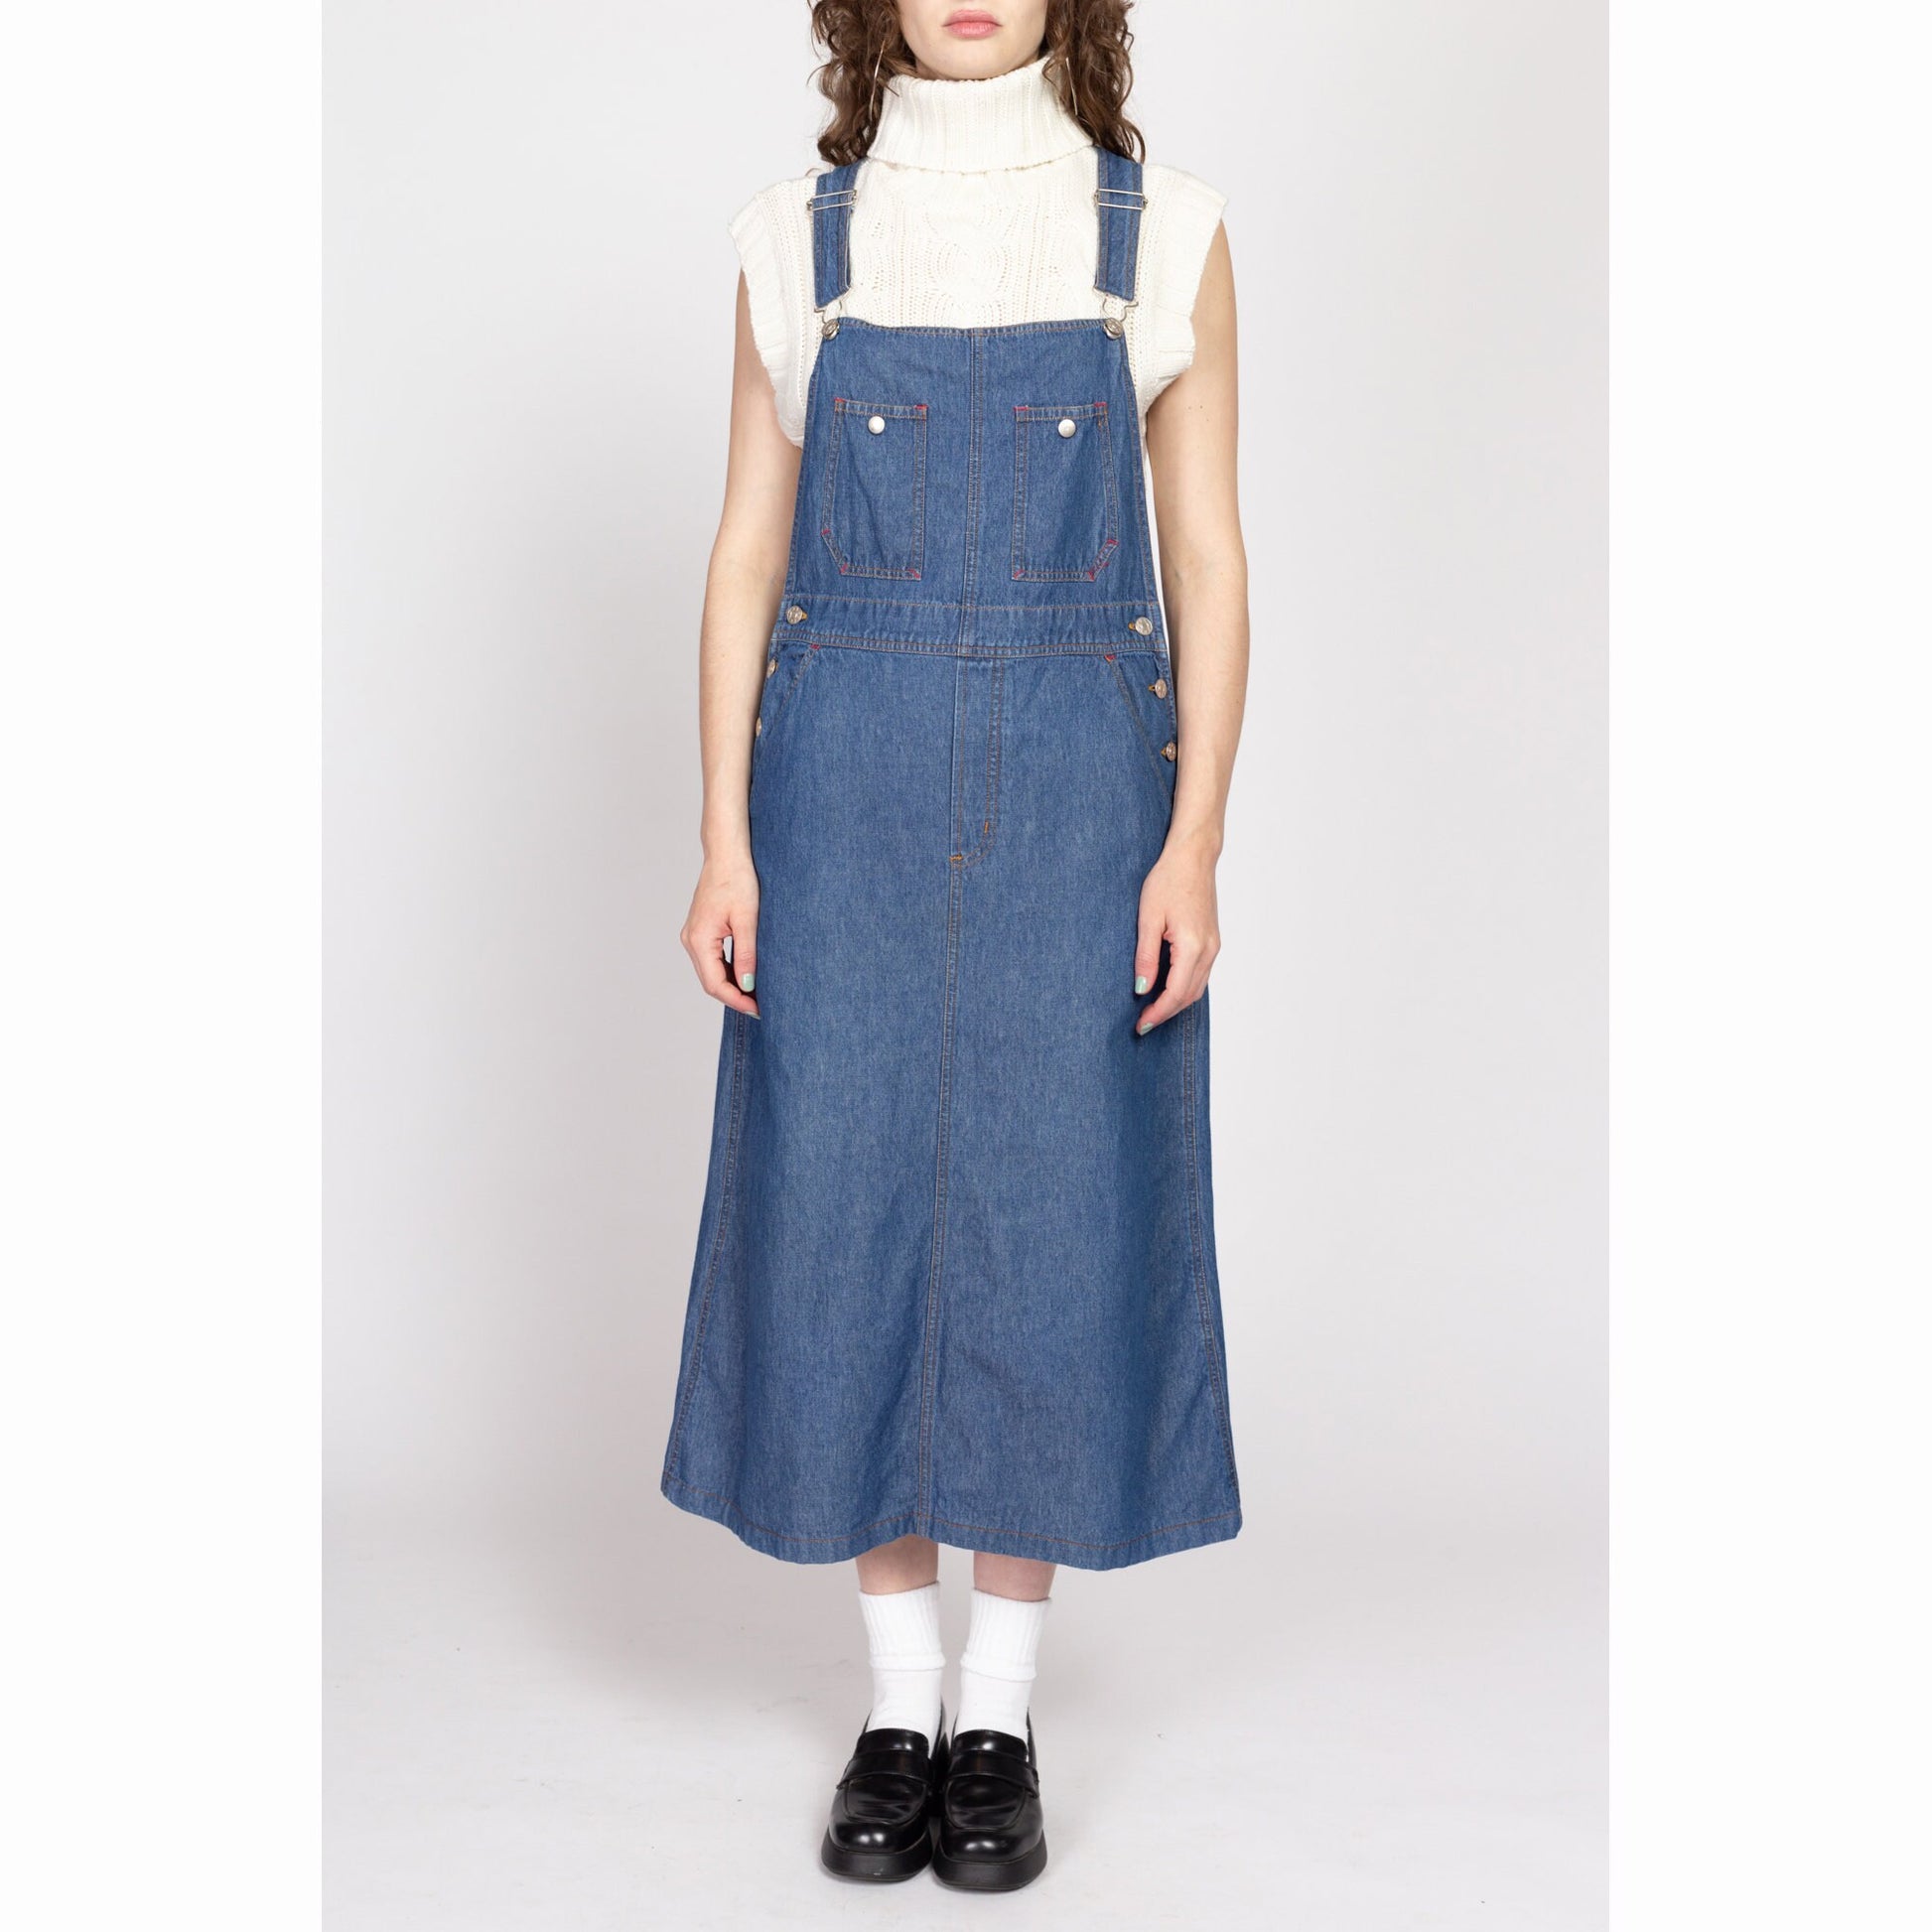 Small 80s Forenza Denim Pinafore Dress | Vintage Overall Blue Jean Grunge Maxi Dress